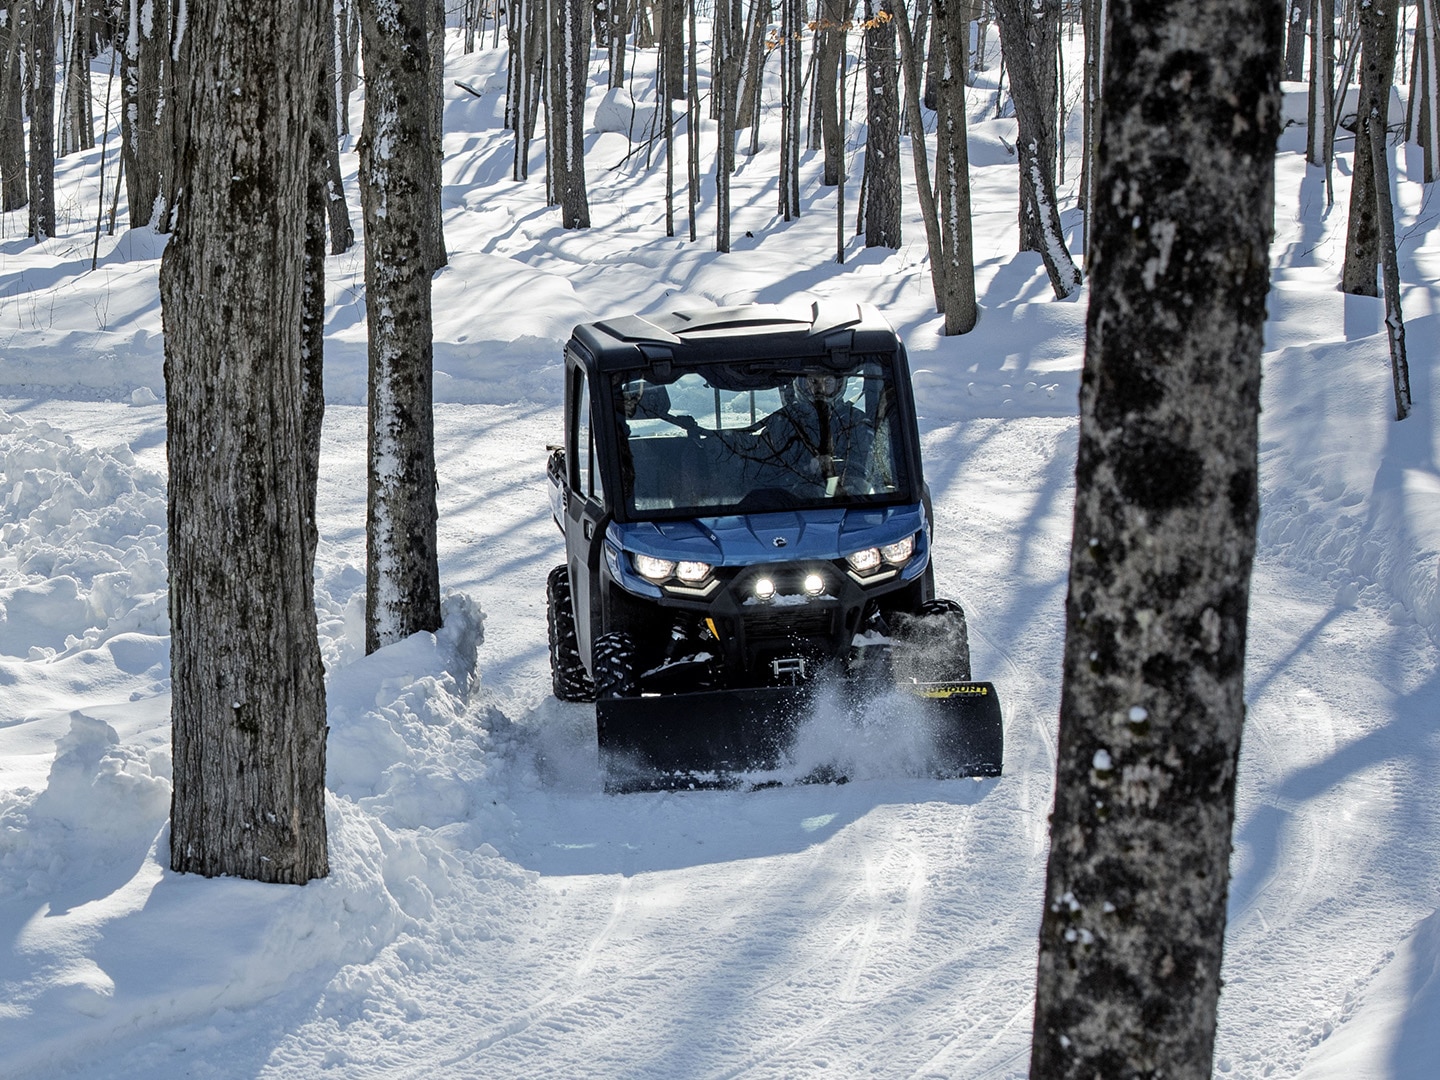 Can-Am Defender side-by-side vehicle plowing snow